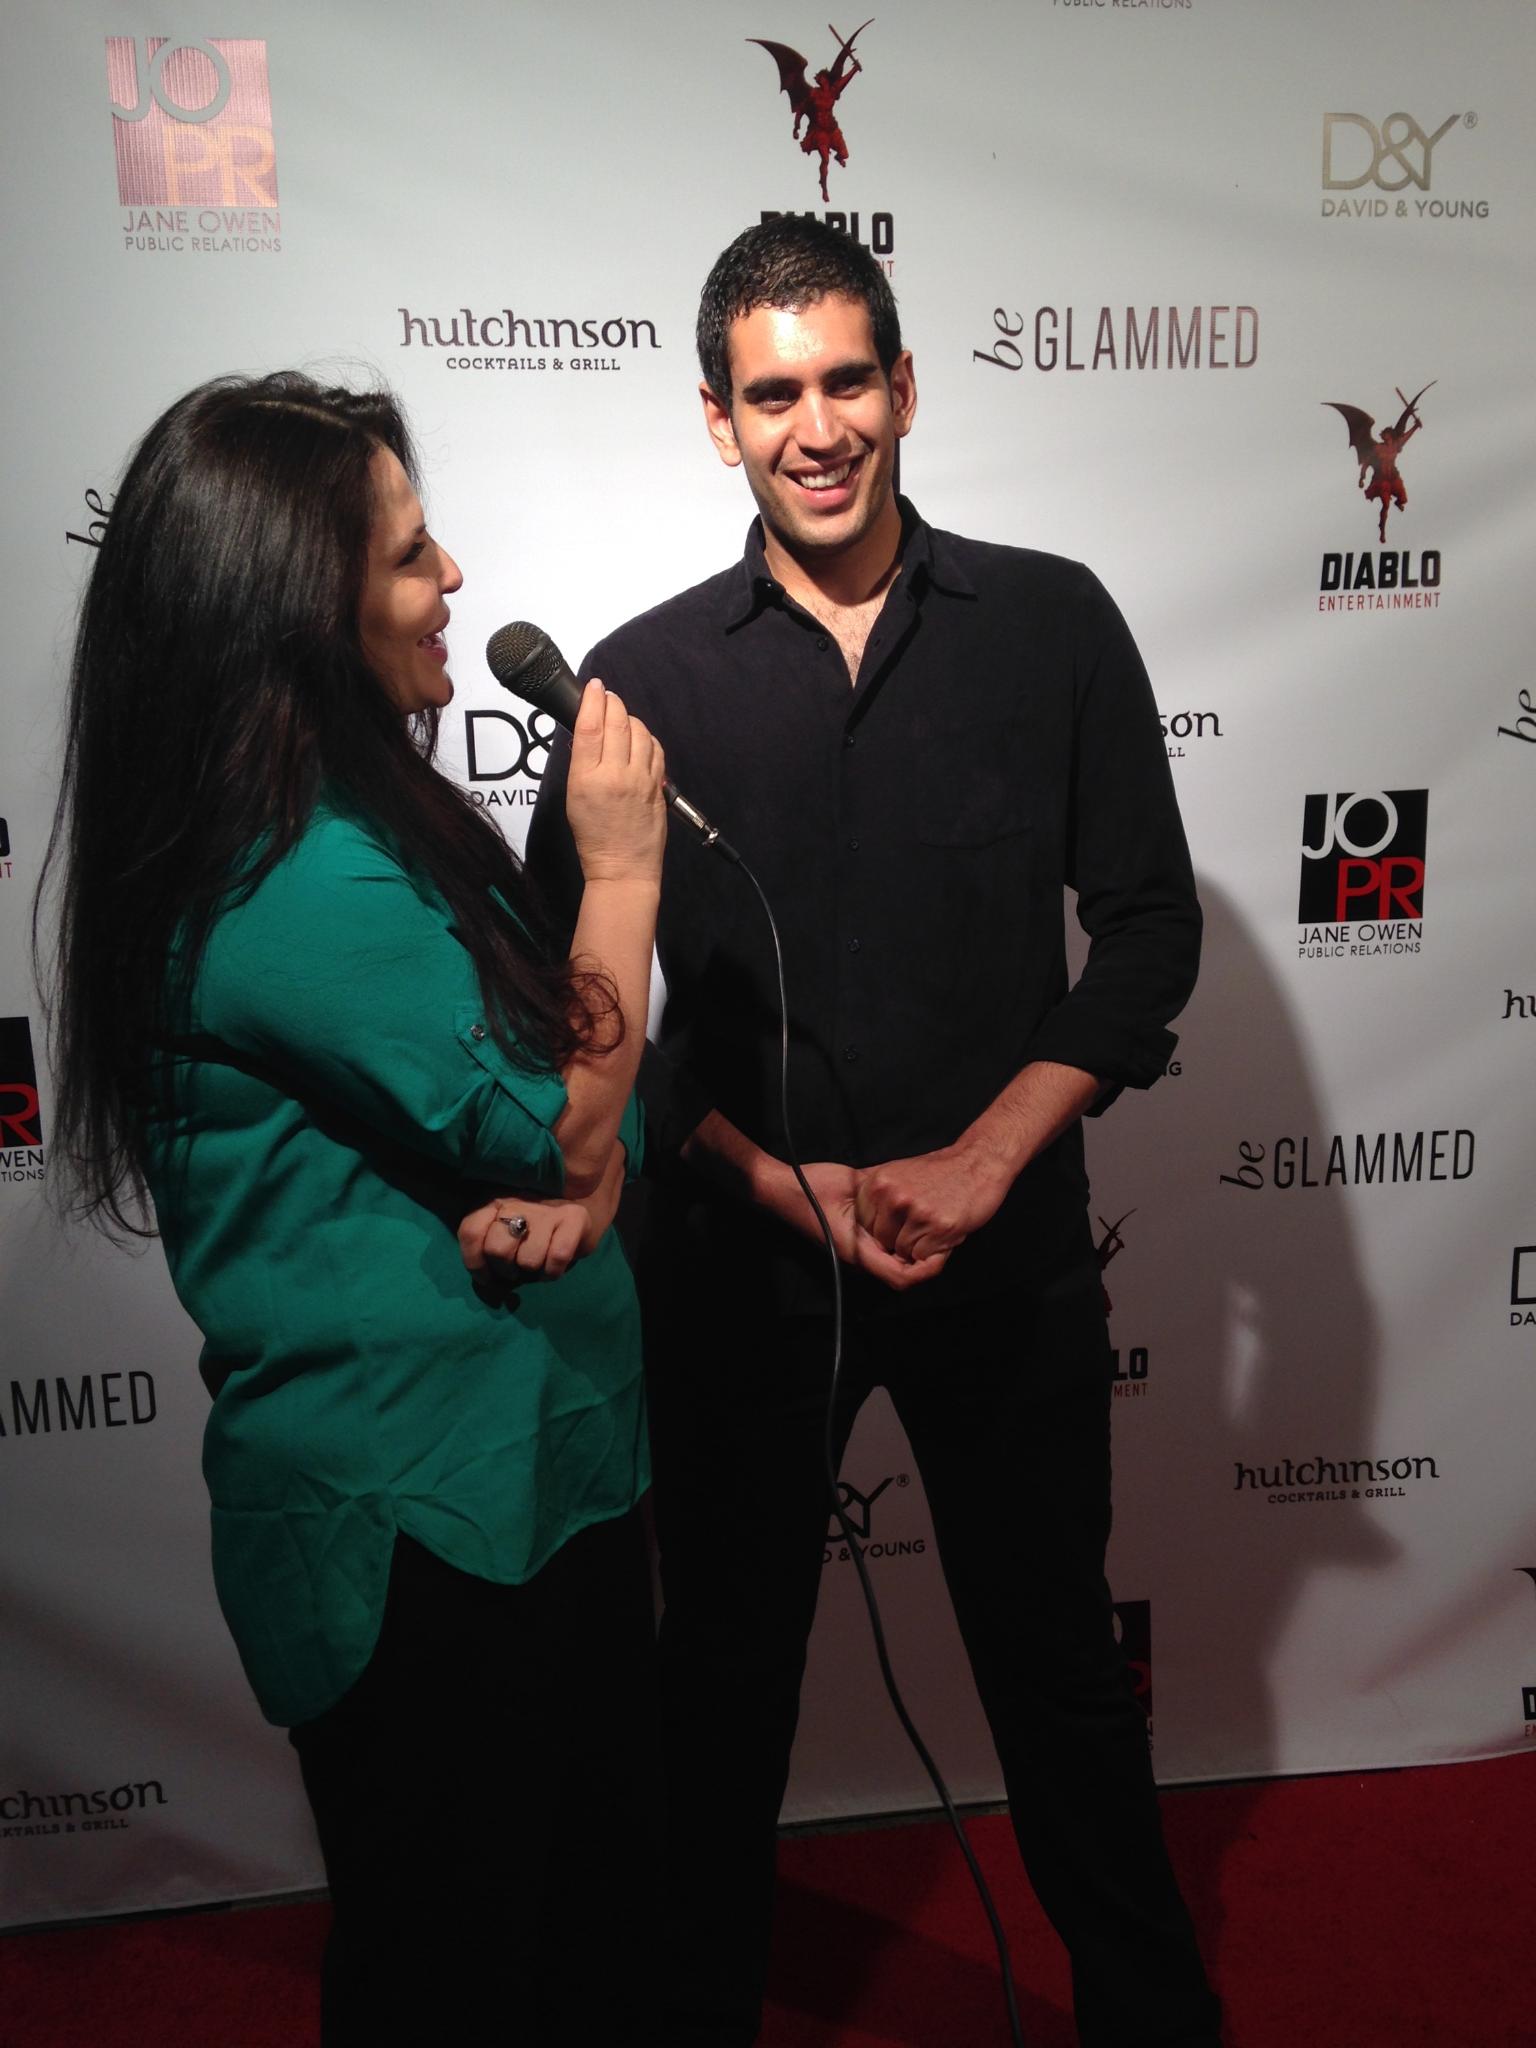 Being interviewed at Jane Owen PR's Four year anniversary party in West Hollywood.